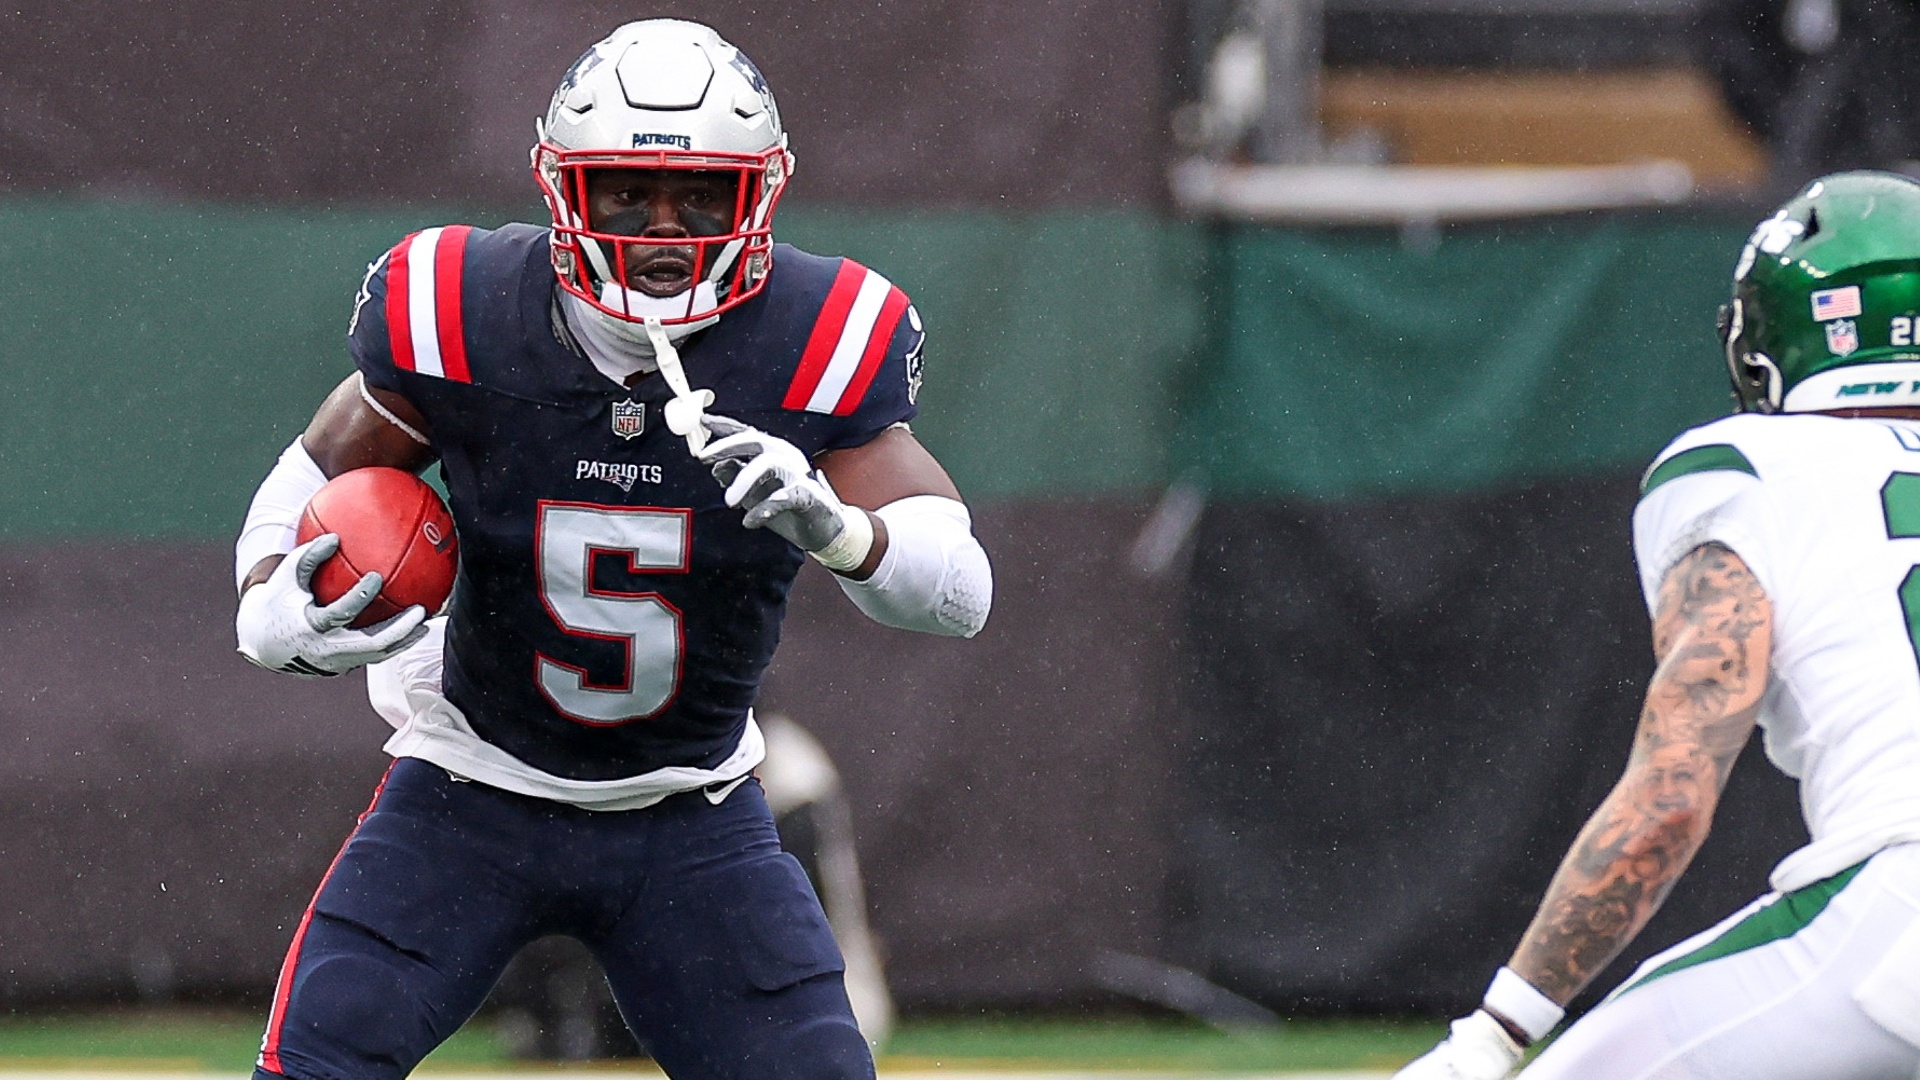 Jabrill Peppers Makes Admission About Play In Patriots-Jets